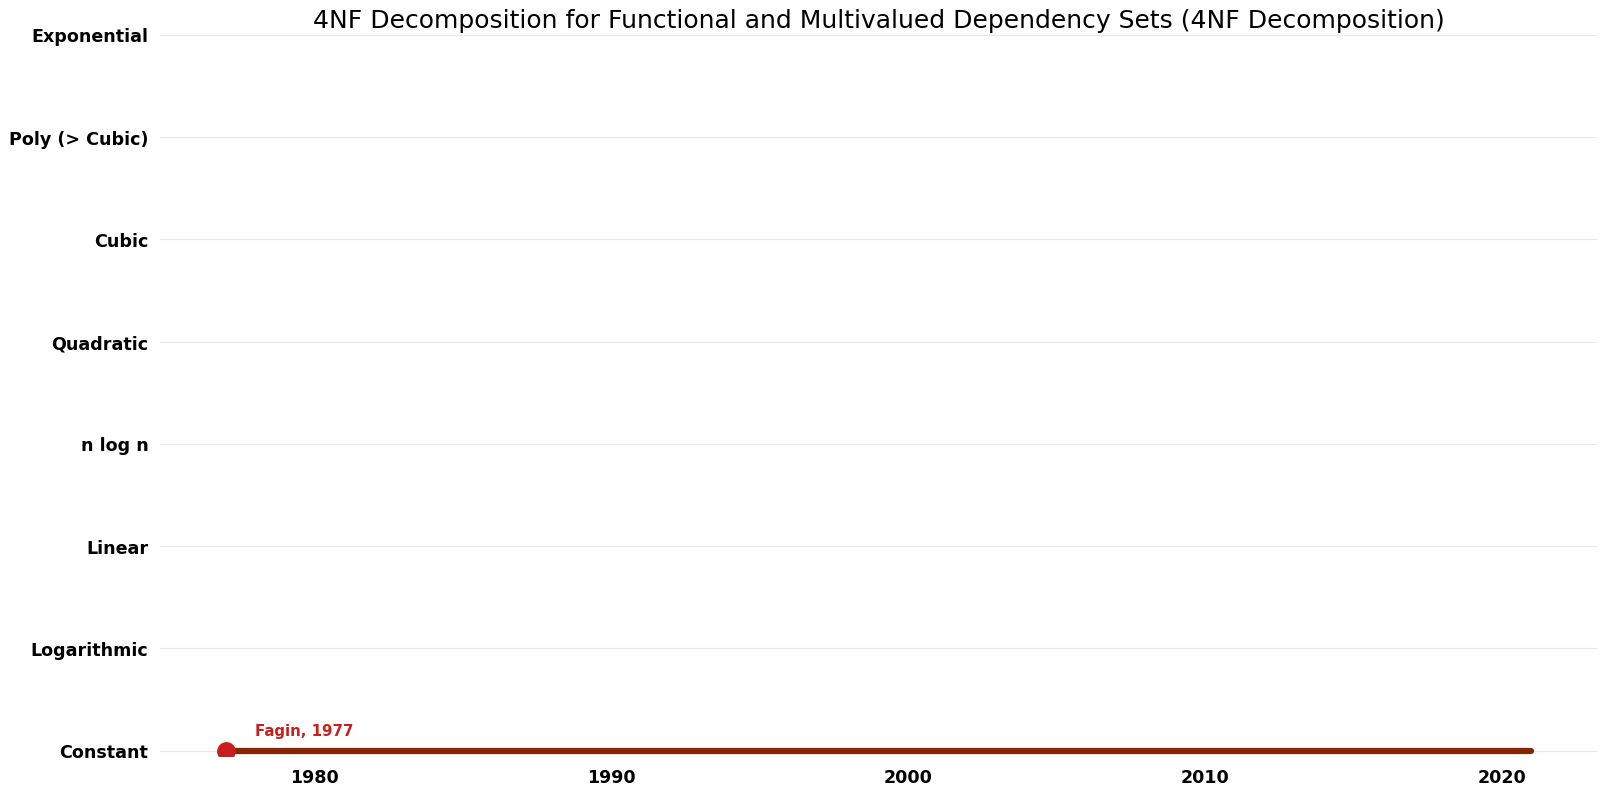 4NF Decomposition - 4NF Decomposition for Functional and Multivalued Dependency Sets - Space.png